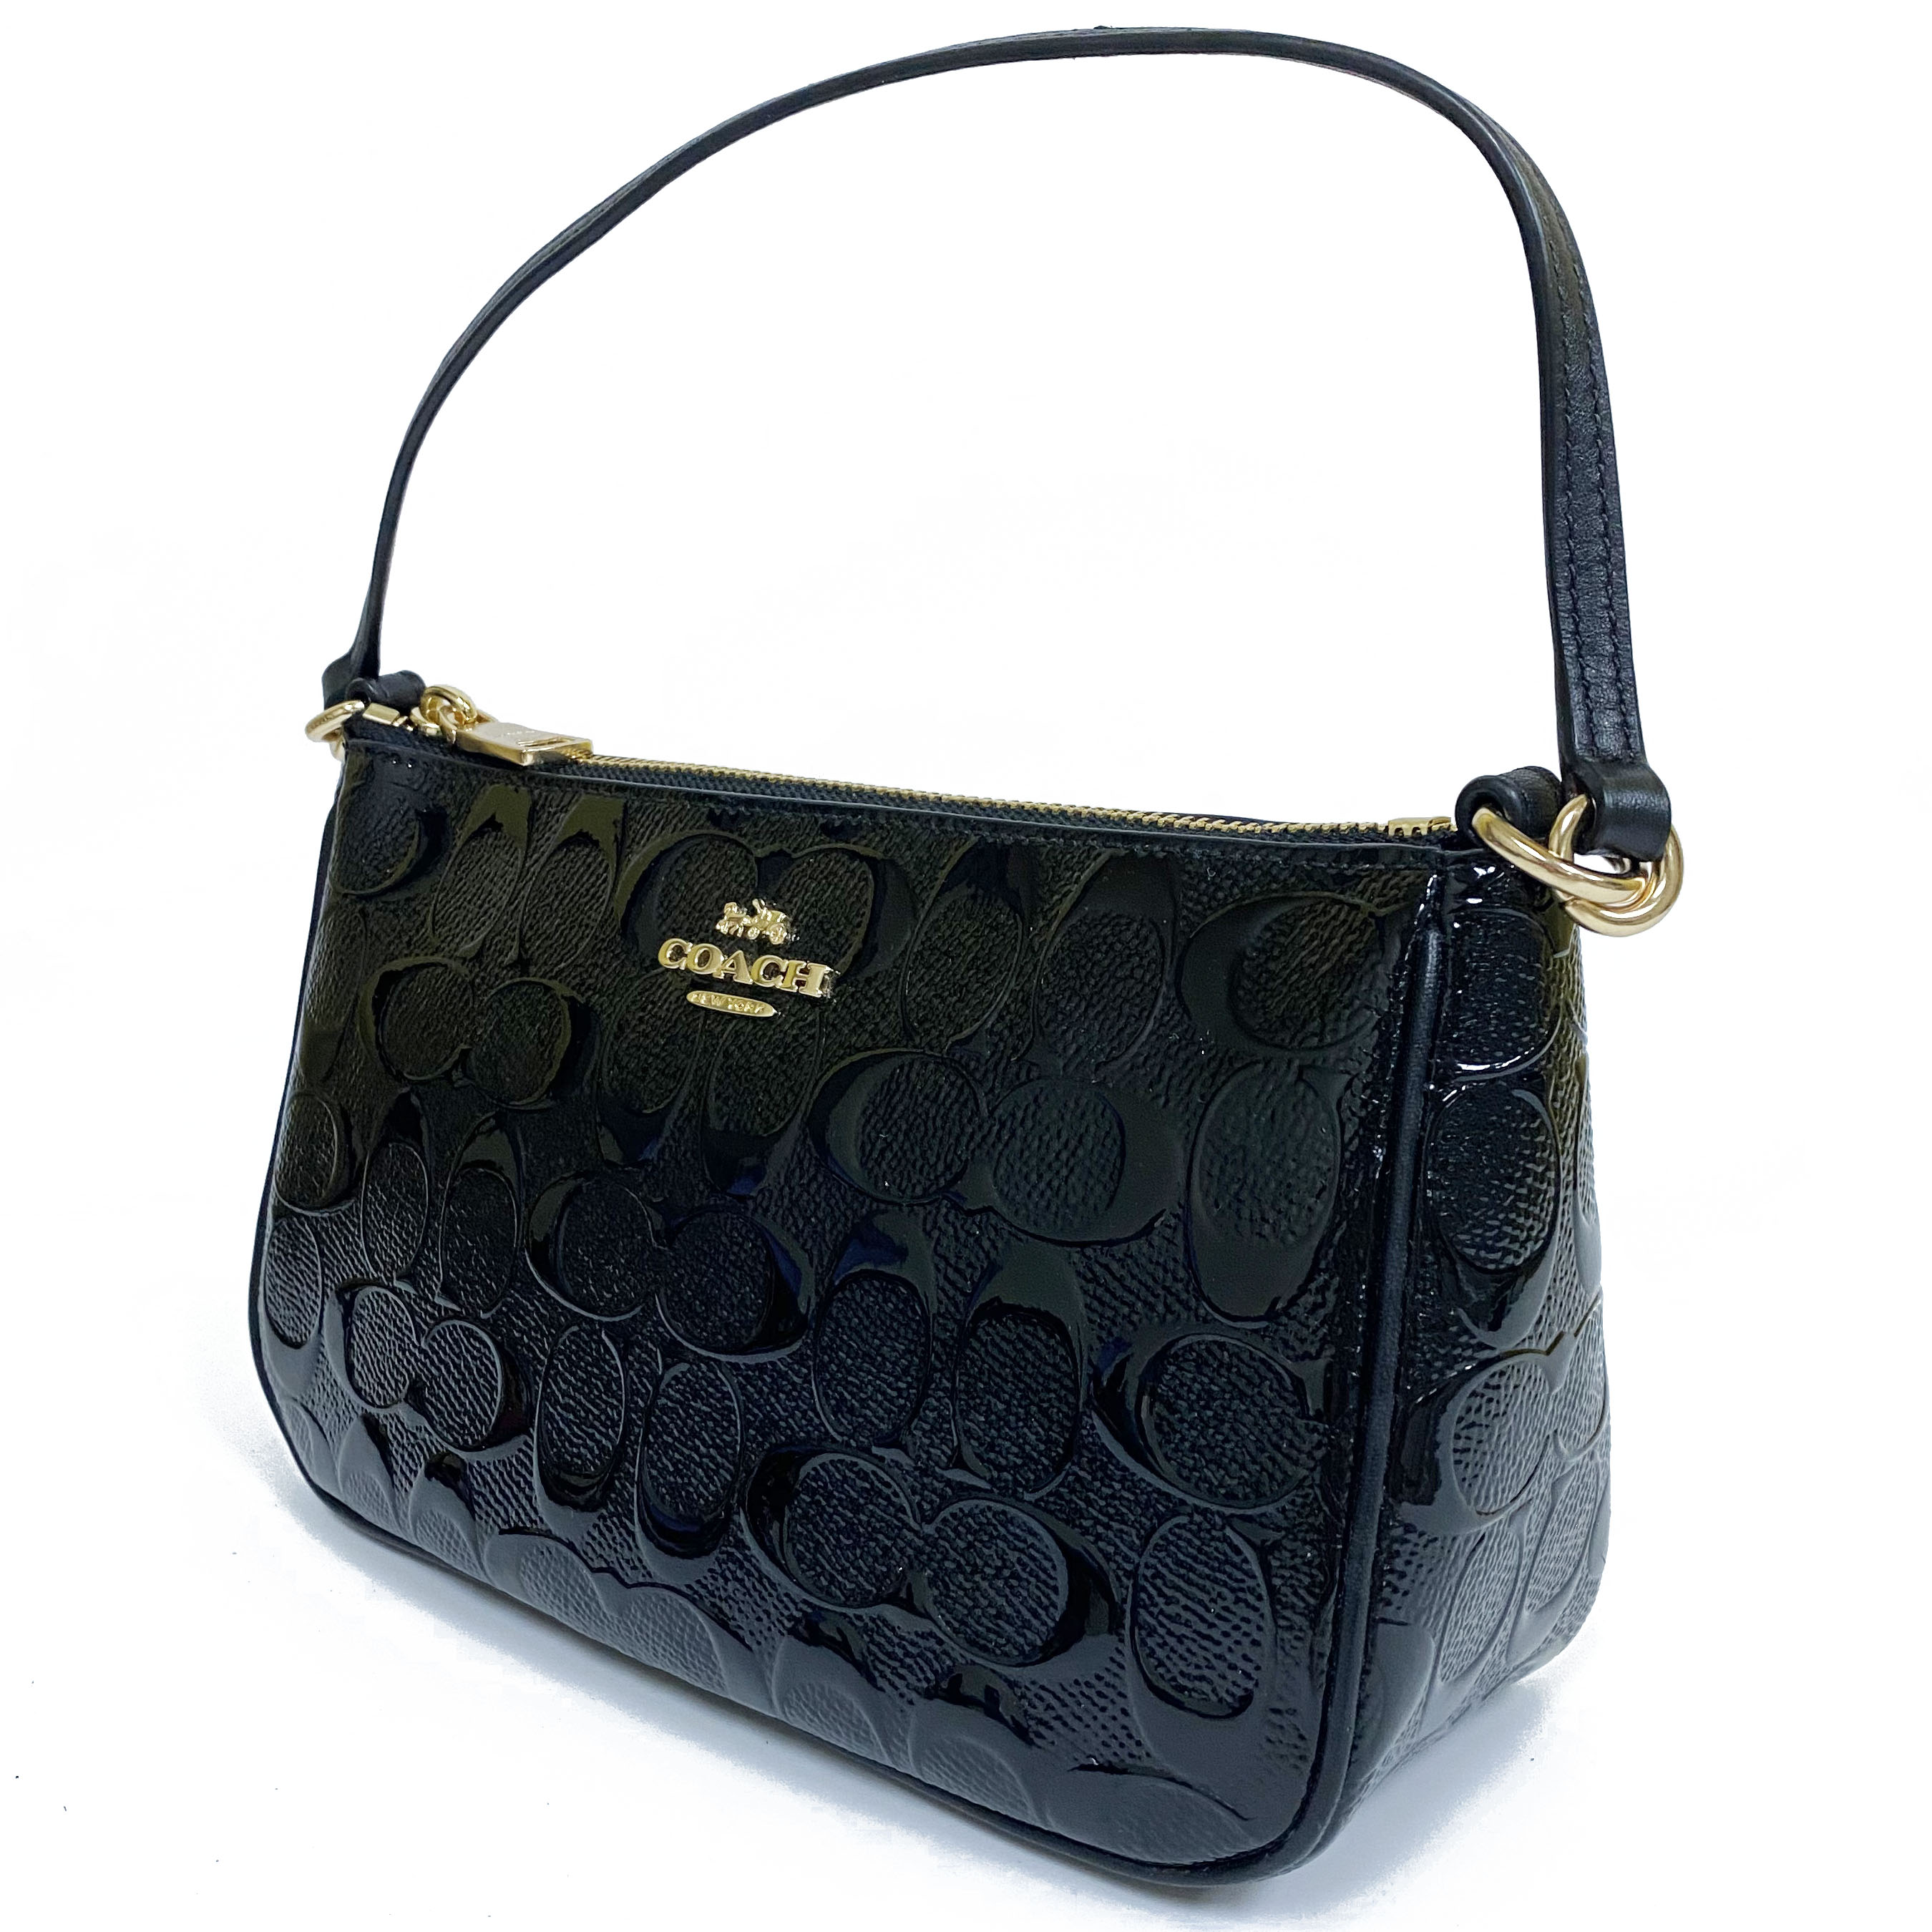 Coach Top Handle Pouch In Signature Debossed Patent Leather Black # F56518